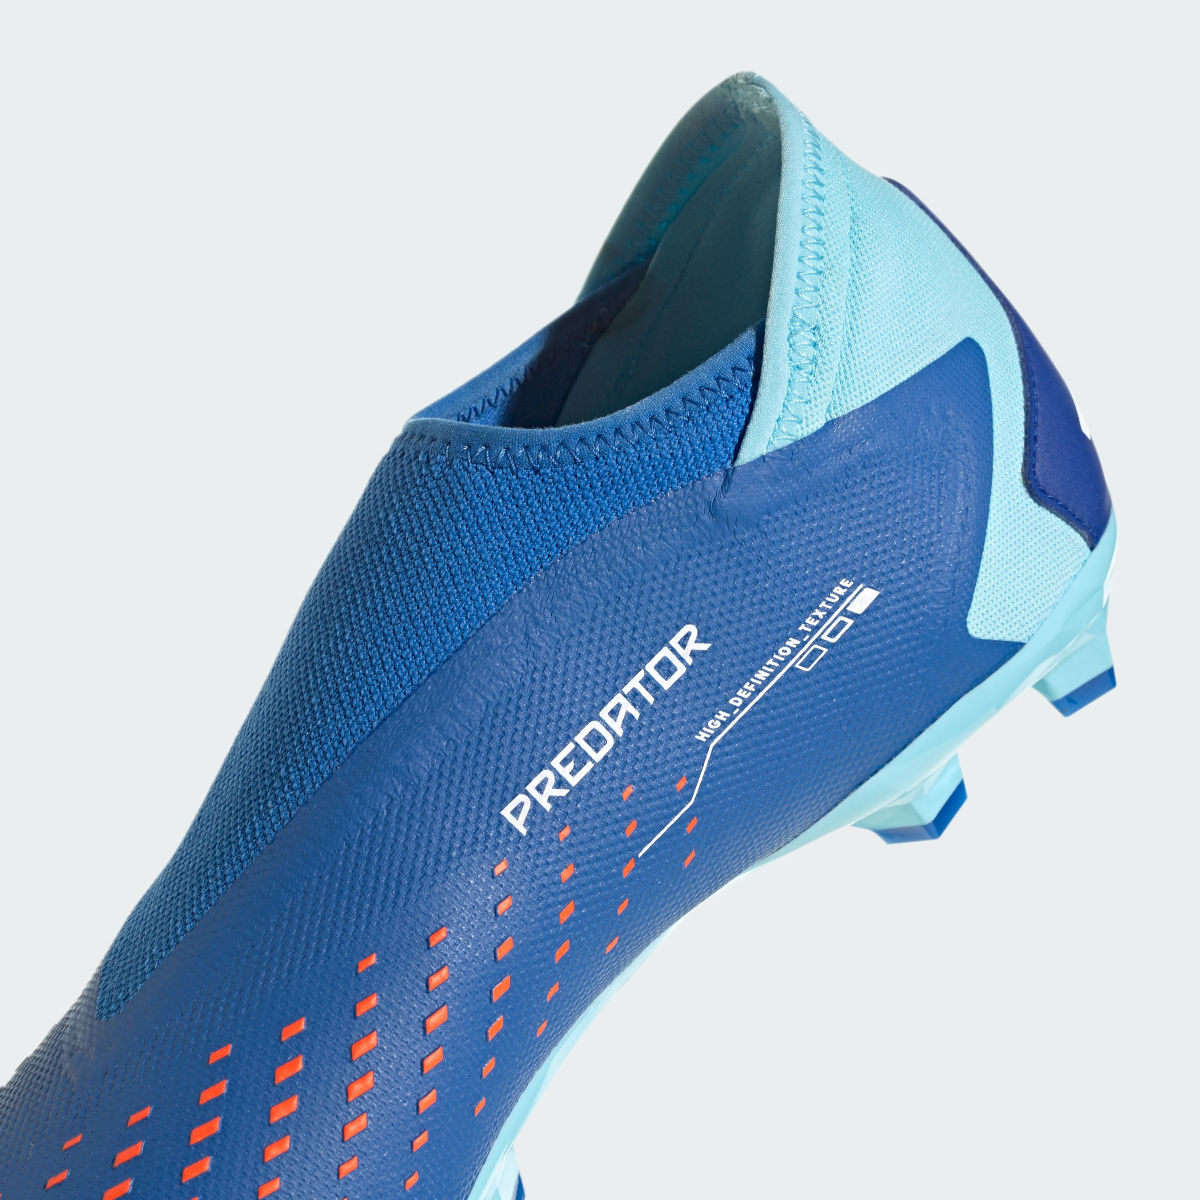 Adidas Predator Accuracy.3 Laceless Firm Ground Boots. 9